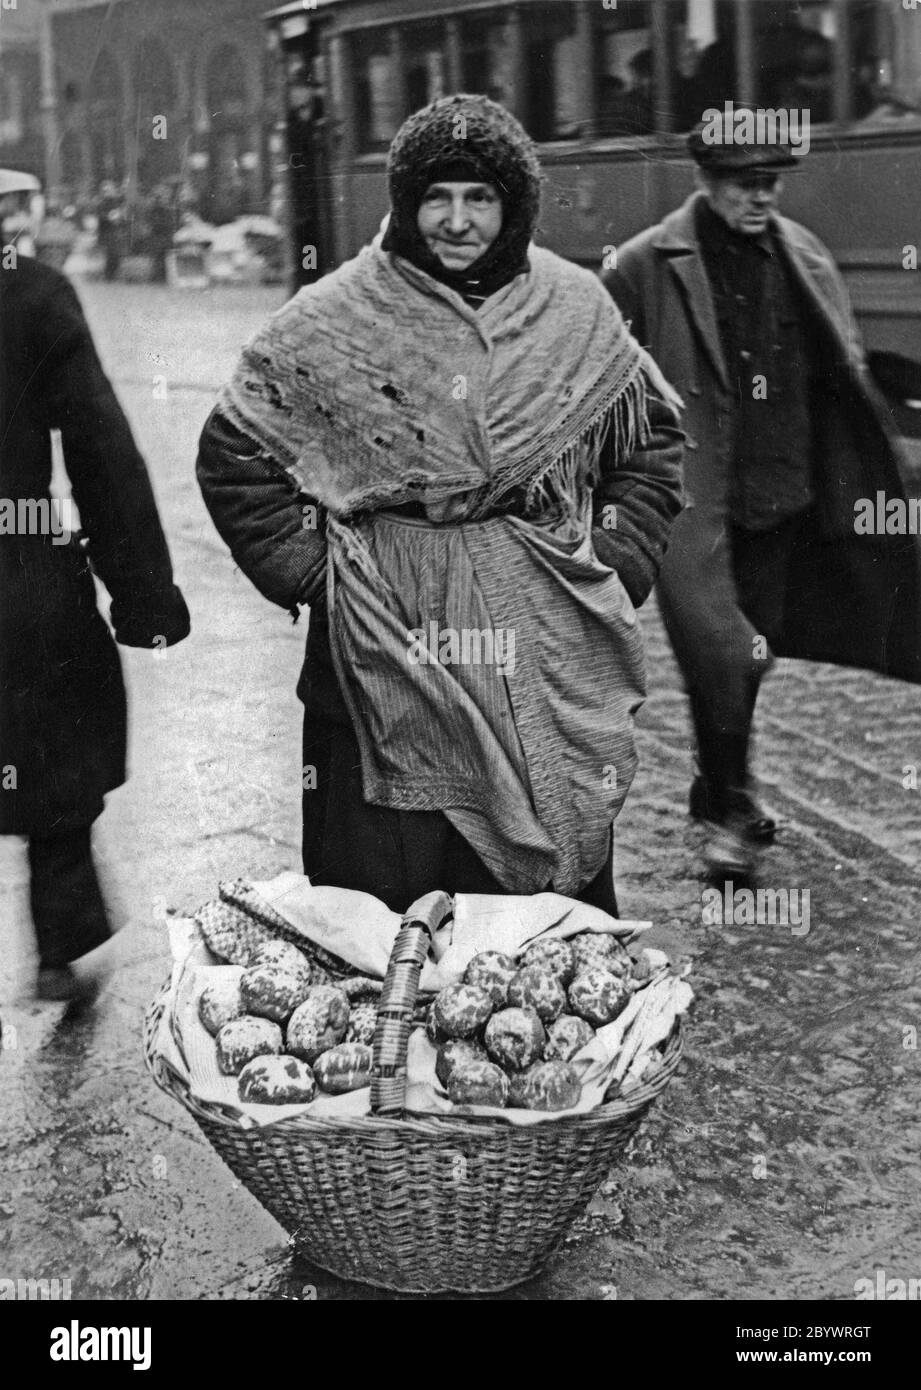 A woman selling pączki (filled doughnuts) in a street in Warsaw ca. December 1934 Stock Photo